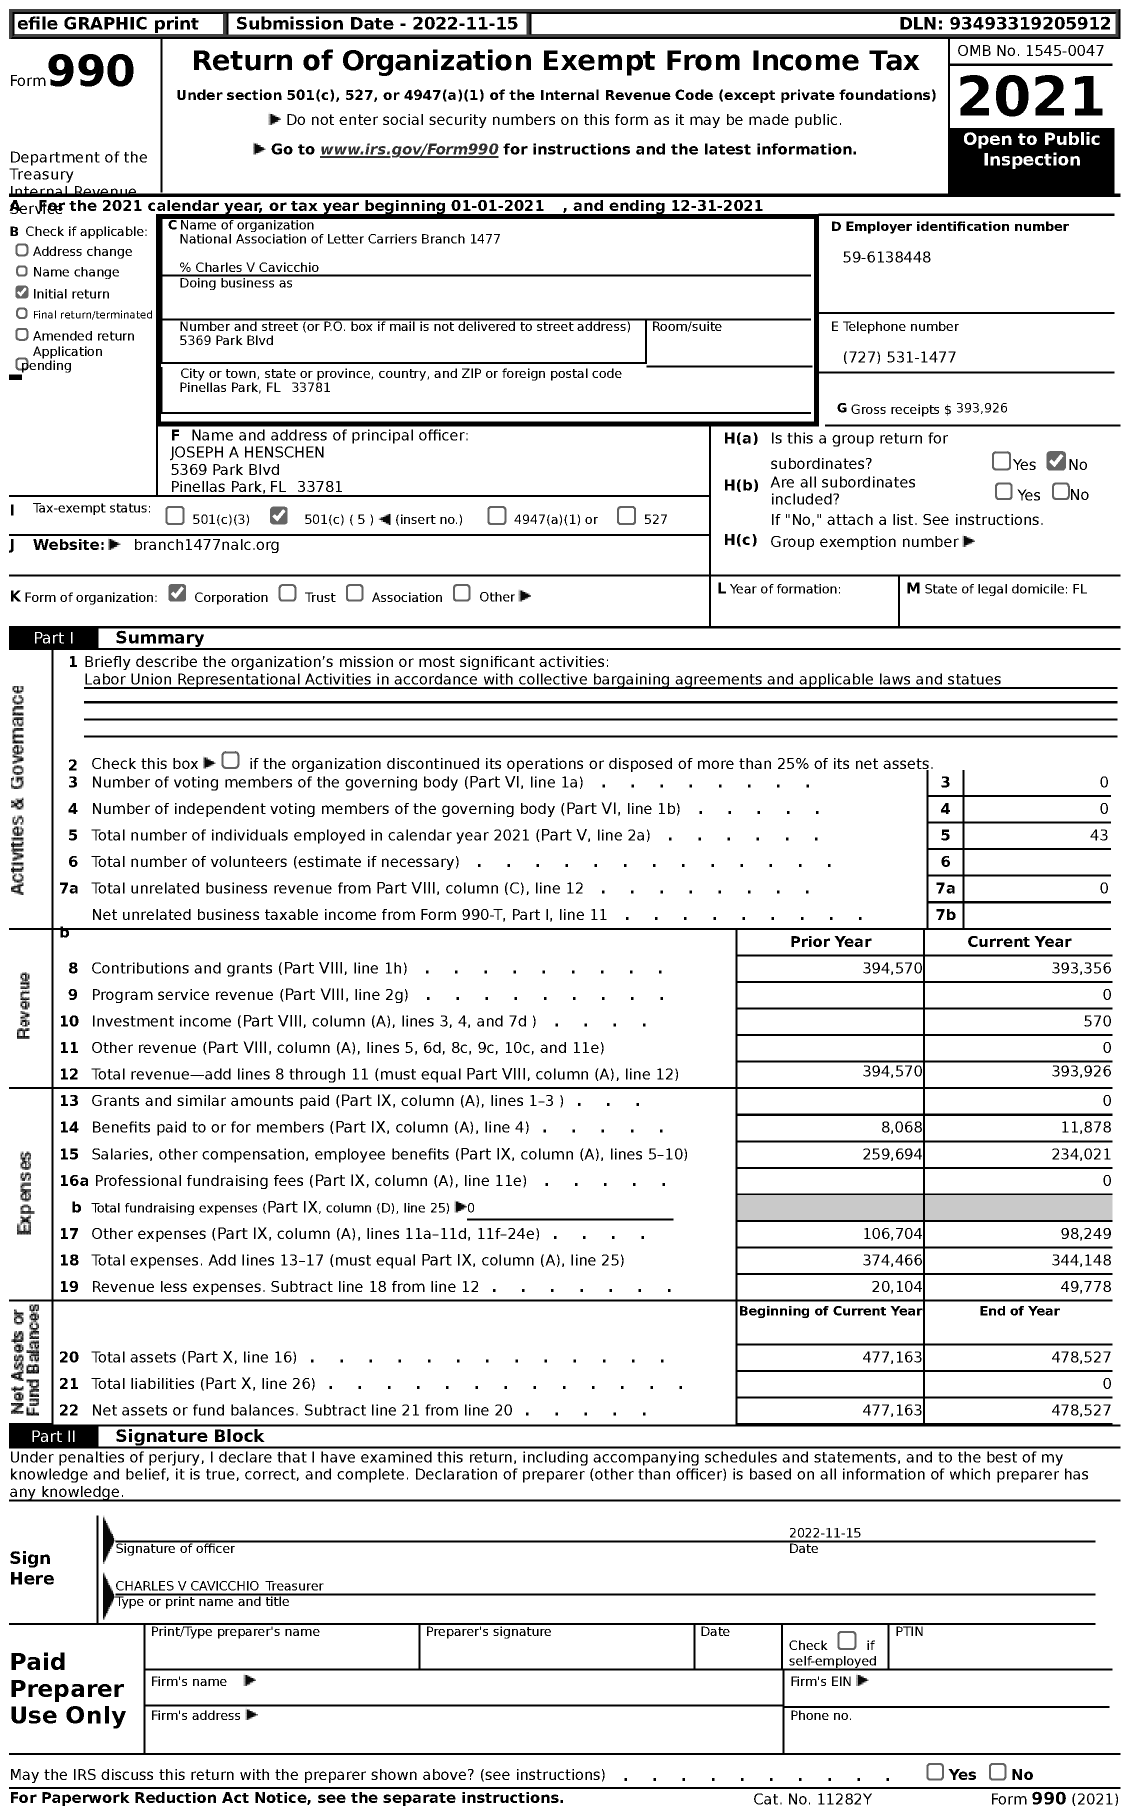 Image of first page of 2021 Form 990 for National Association of Letter Carriers - 1477 W Coast Fla Letter Carriers